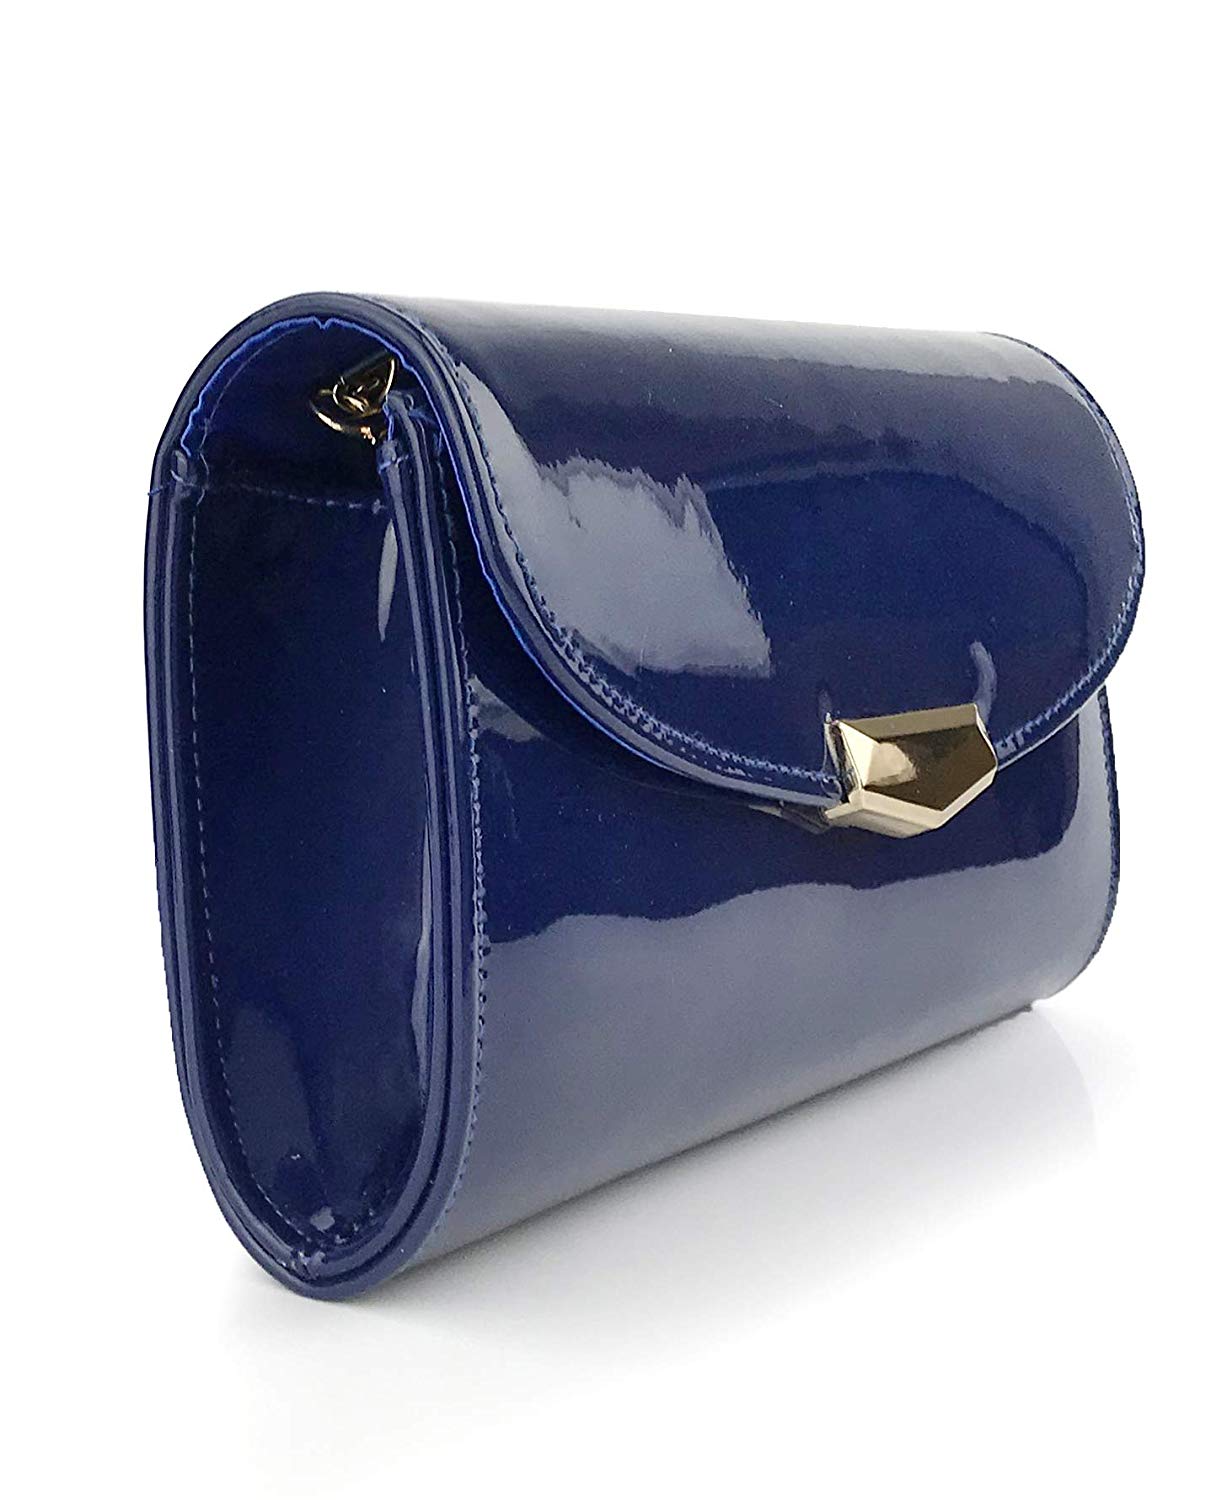 Women Glossy Evening Clutch Faux Patent Leather Chain Shoulder Bag Large Capacity Purse - Hoxis Bags